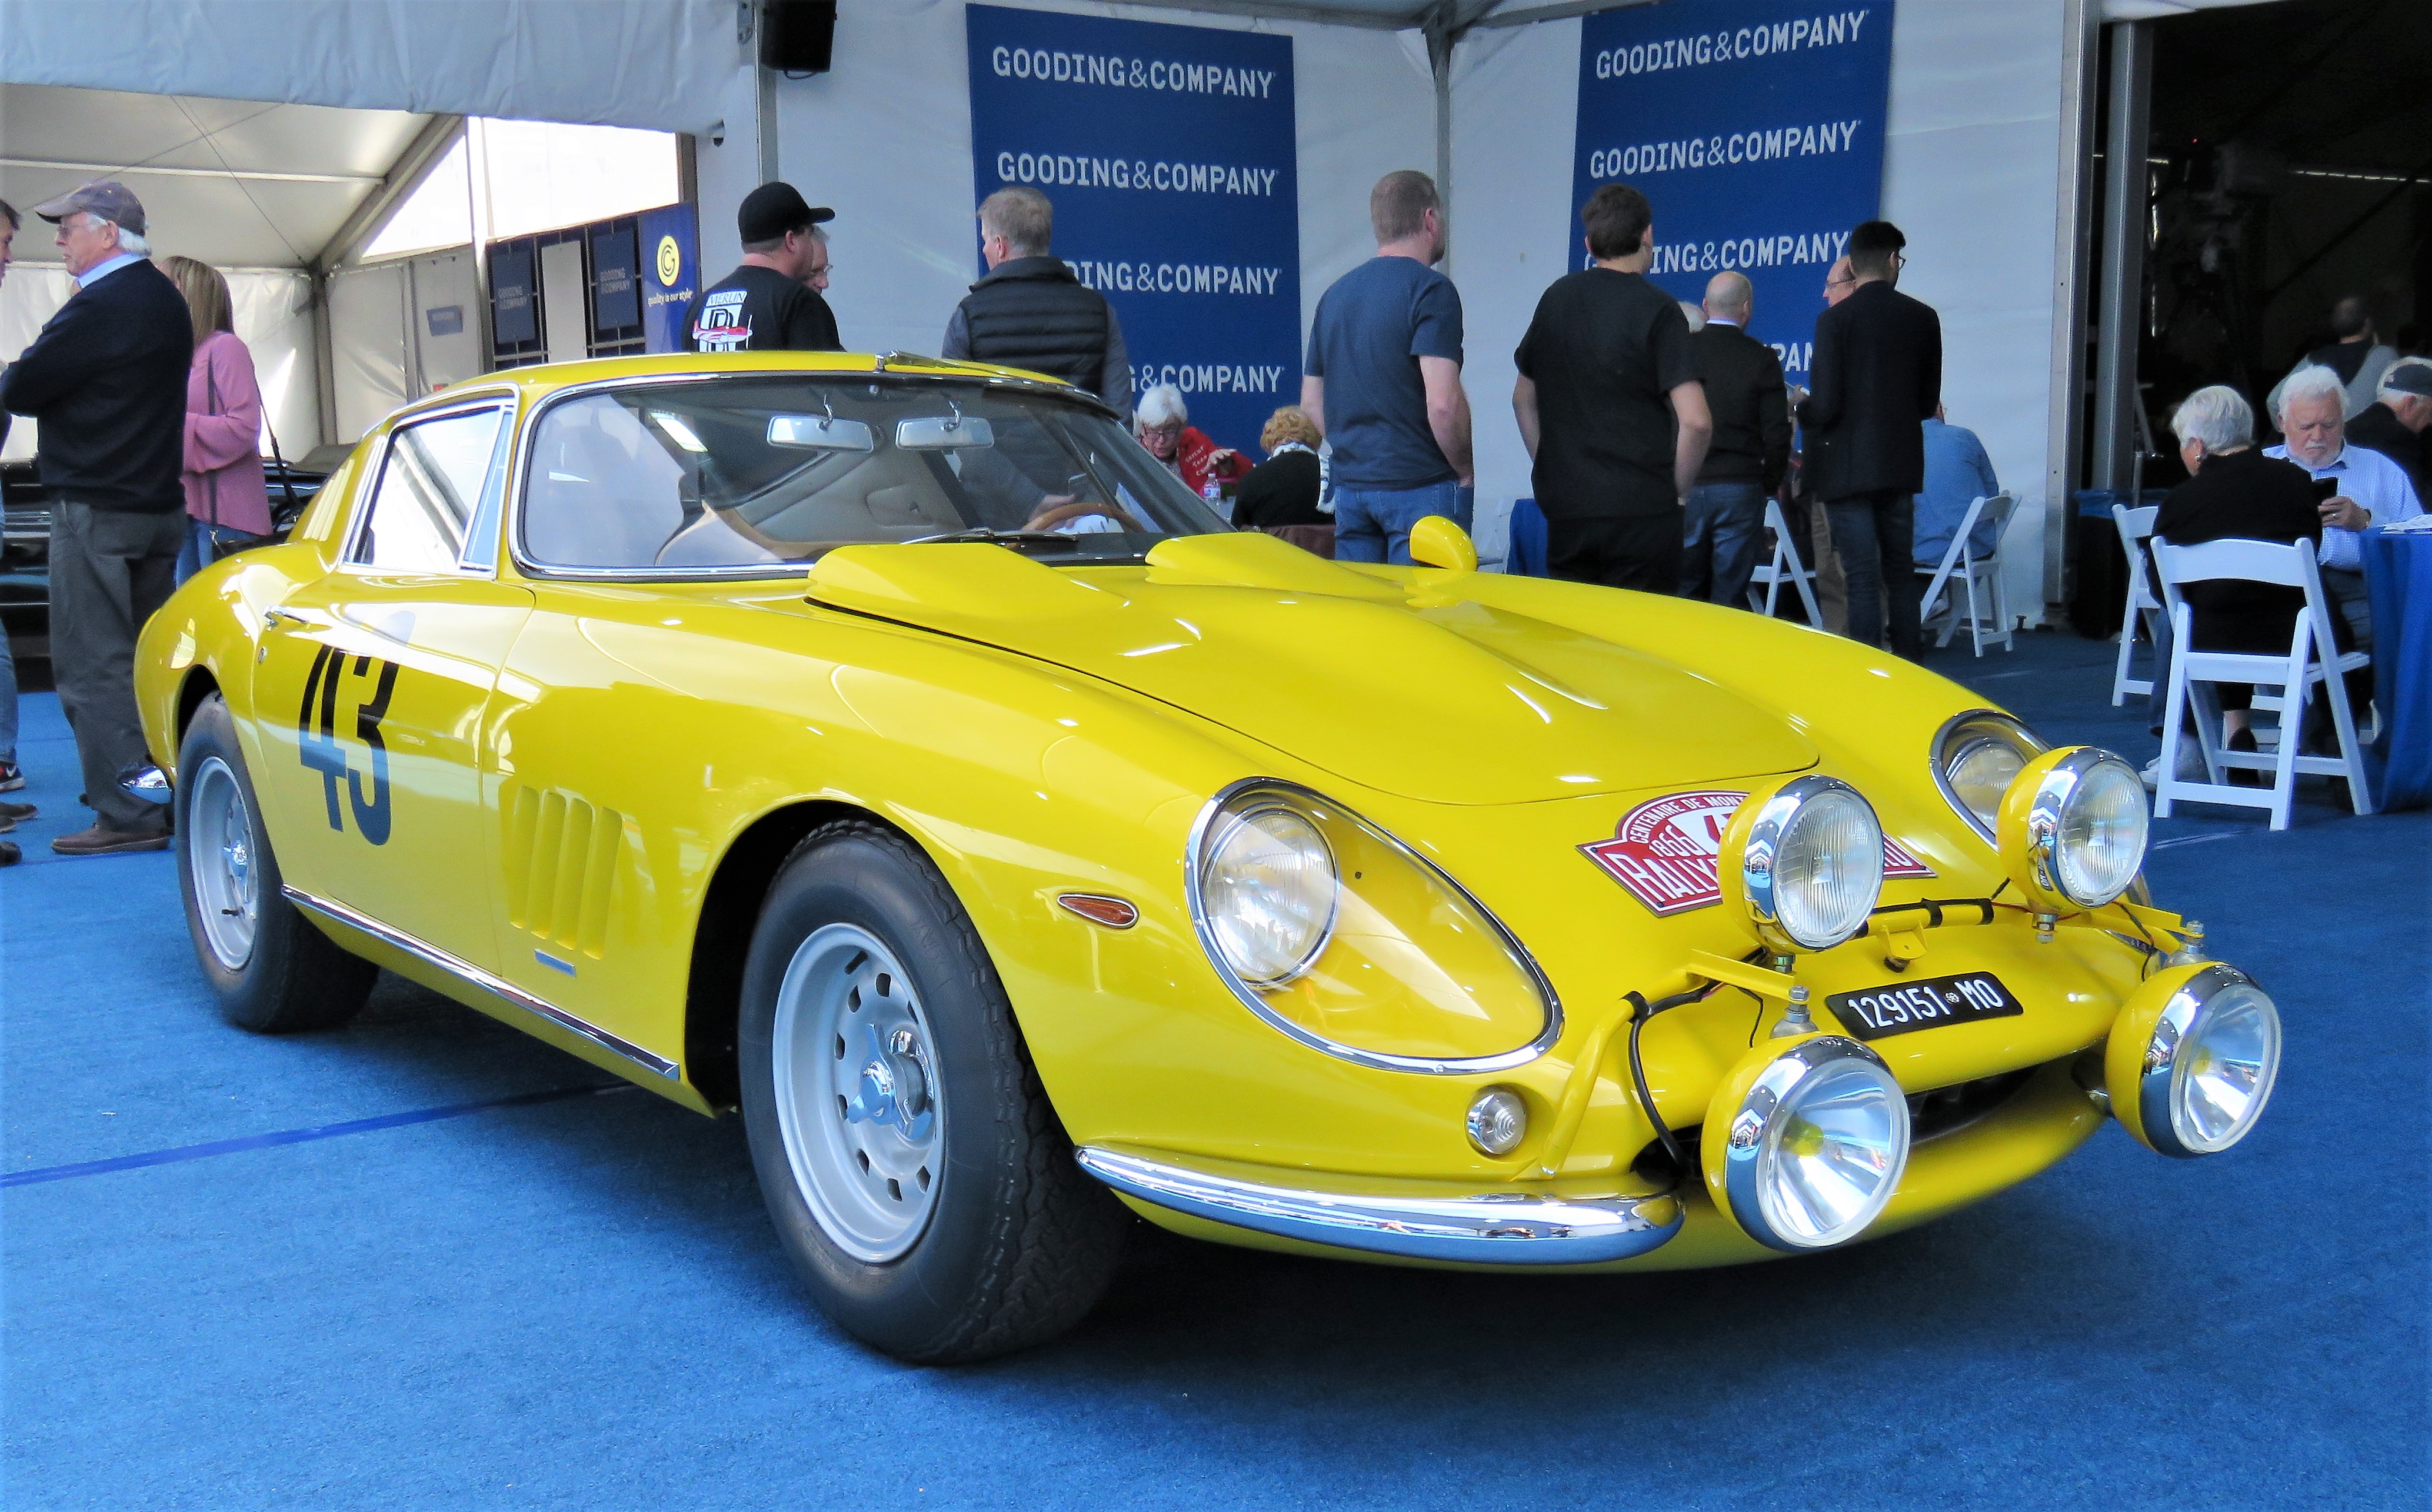 Arizona auctions, Collector car market reshaping itself at Arizona auctions, ClassicCars.com Journal